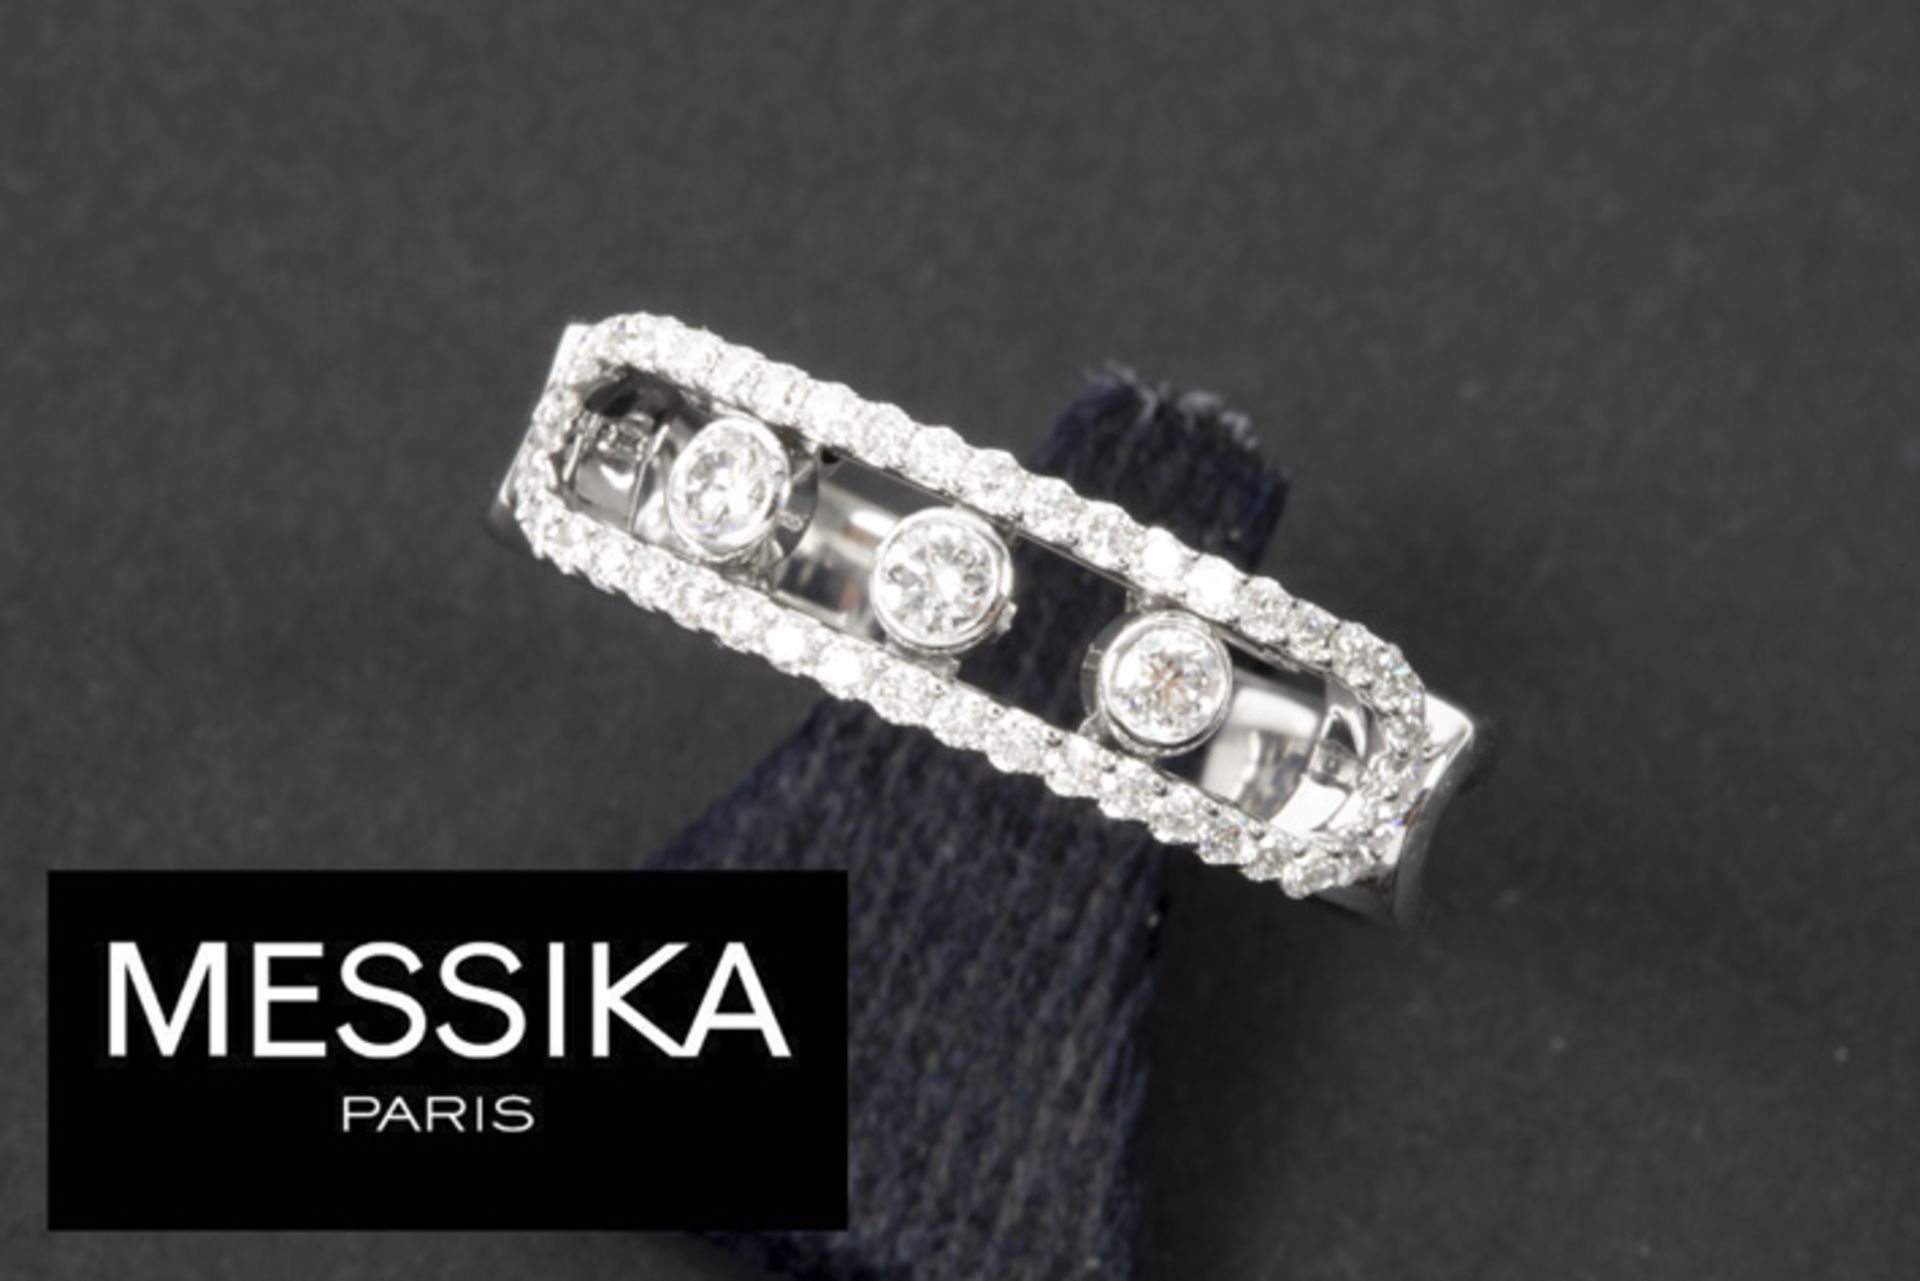 Messika Paris signed ring in white gold (18 carat) with ca 0,35 carat of high quality brilliant